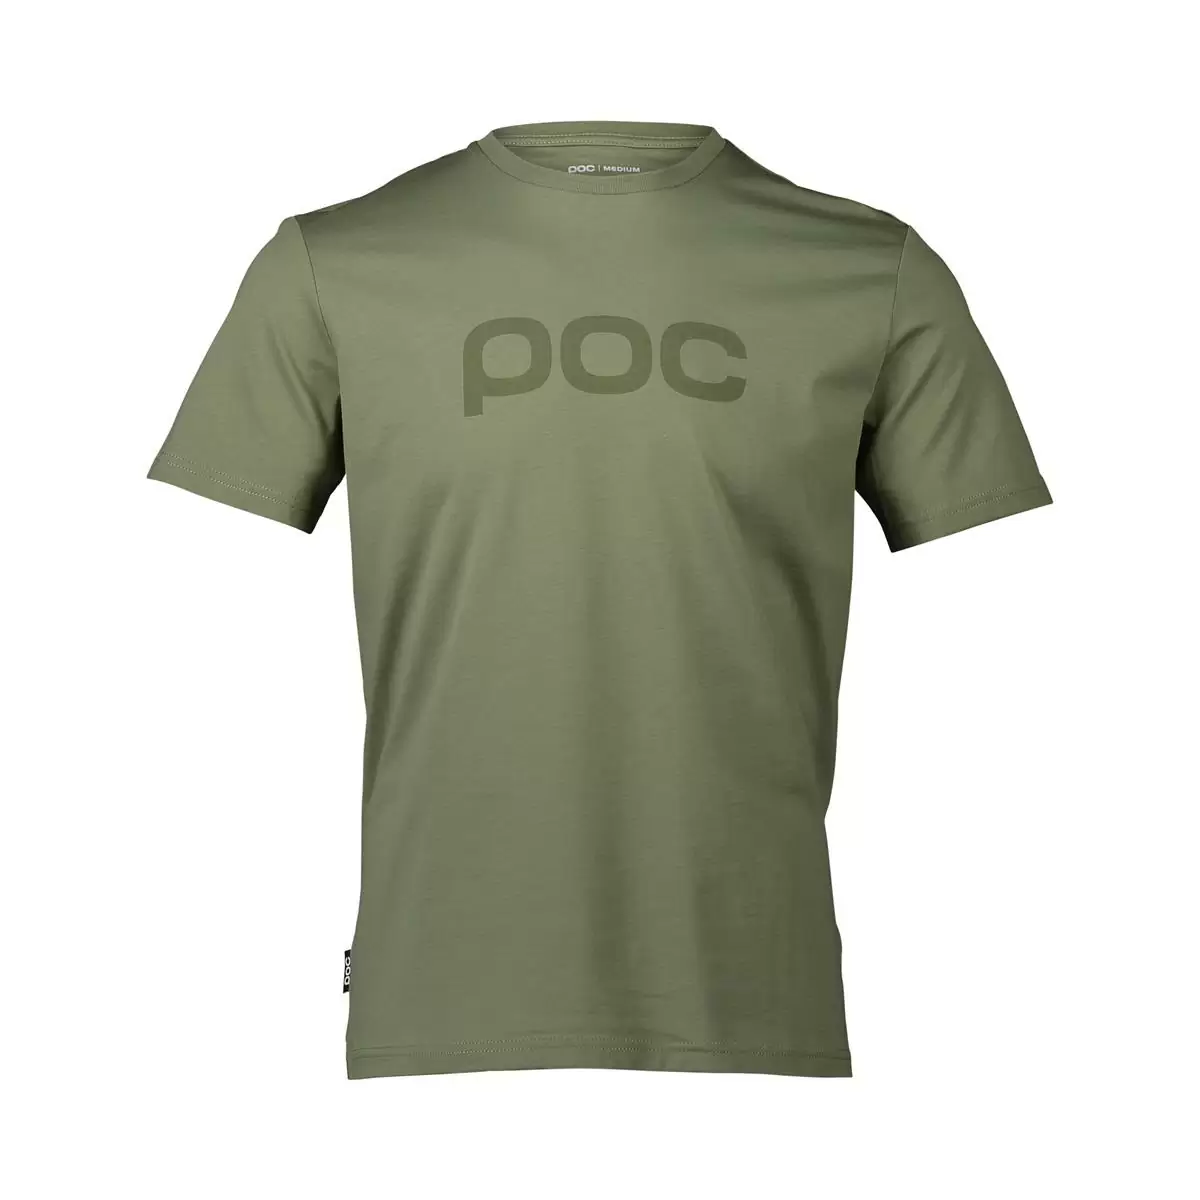 T-shirt Manches Courtes Epidote Vert Taille L - image